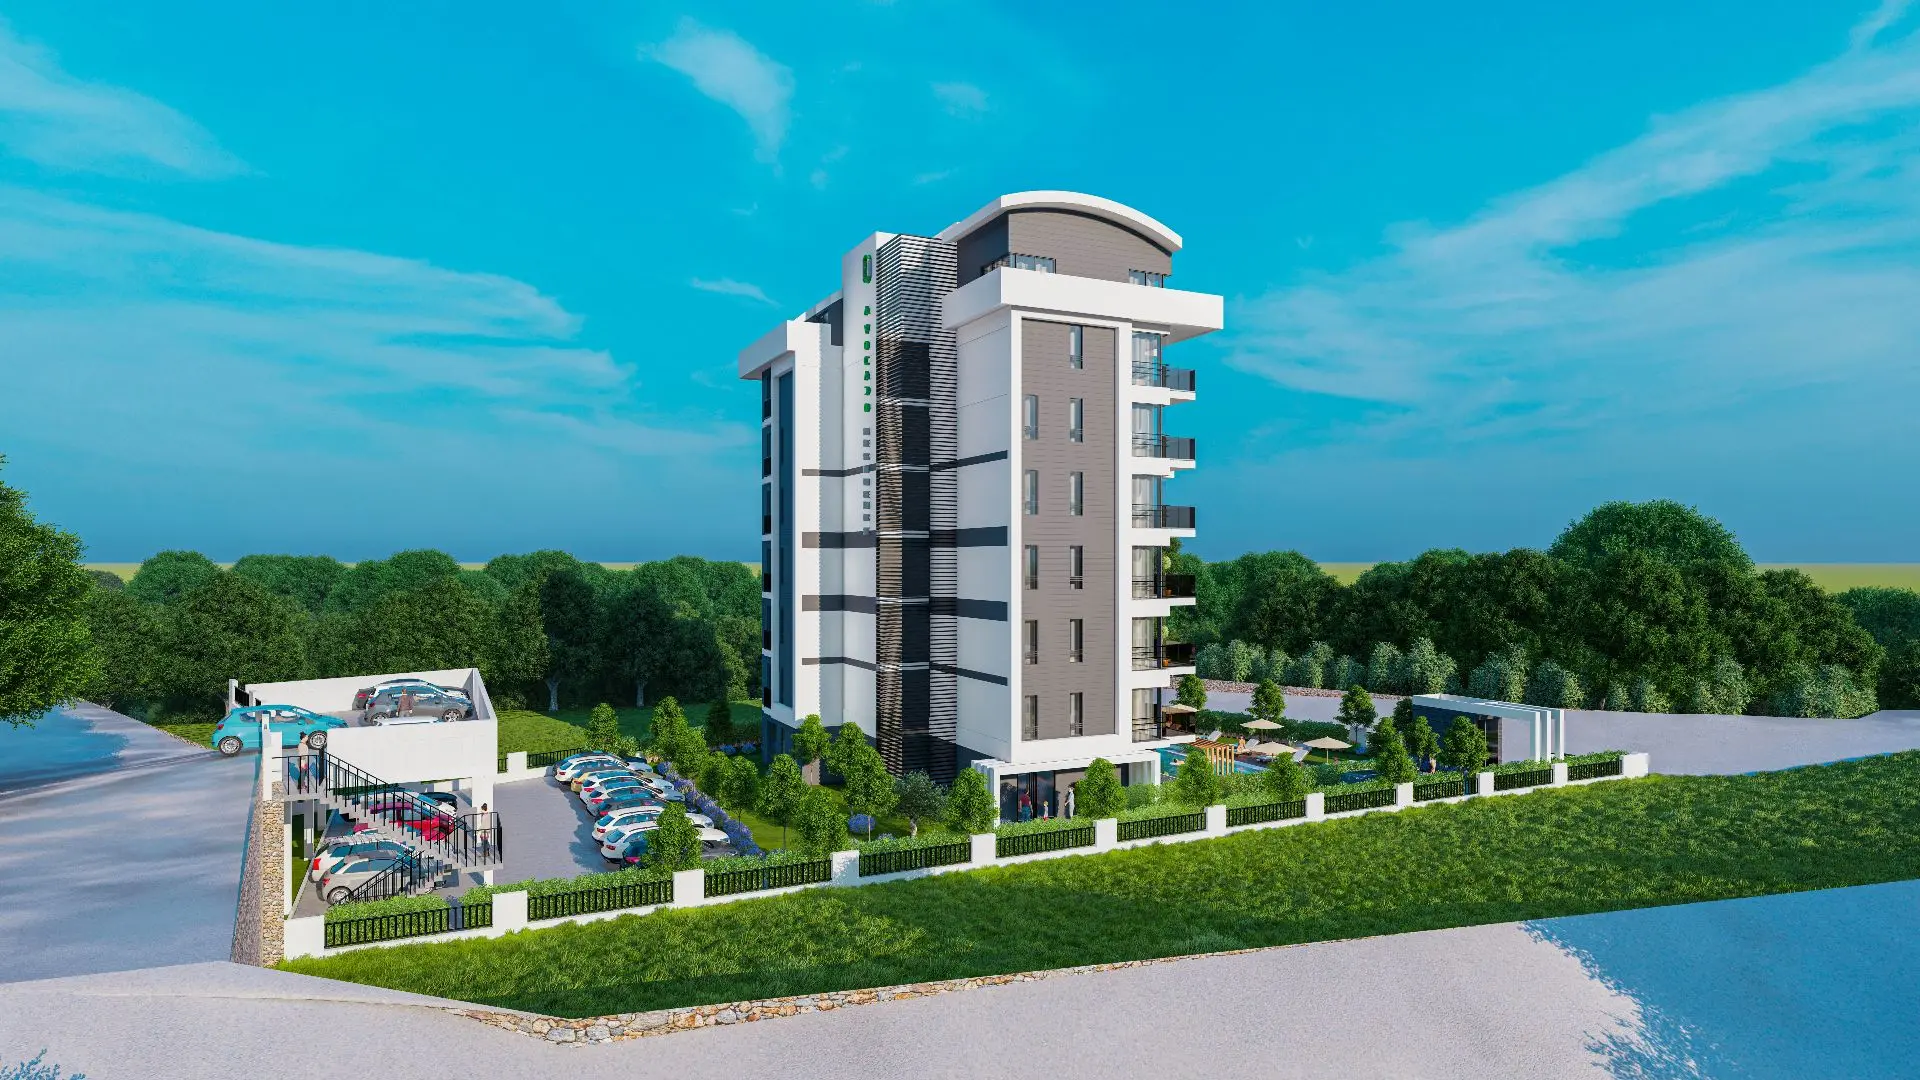 NEW RESIDENTIAL PROJECT IN DEMIRTAS